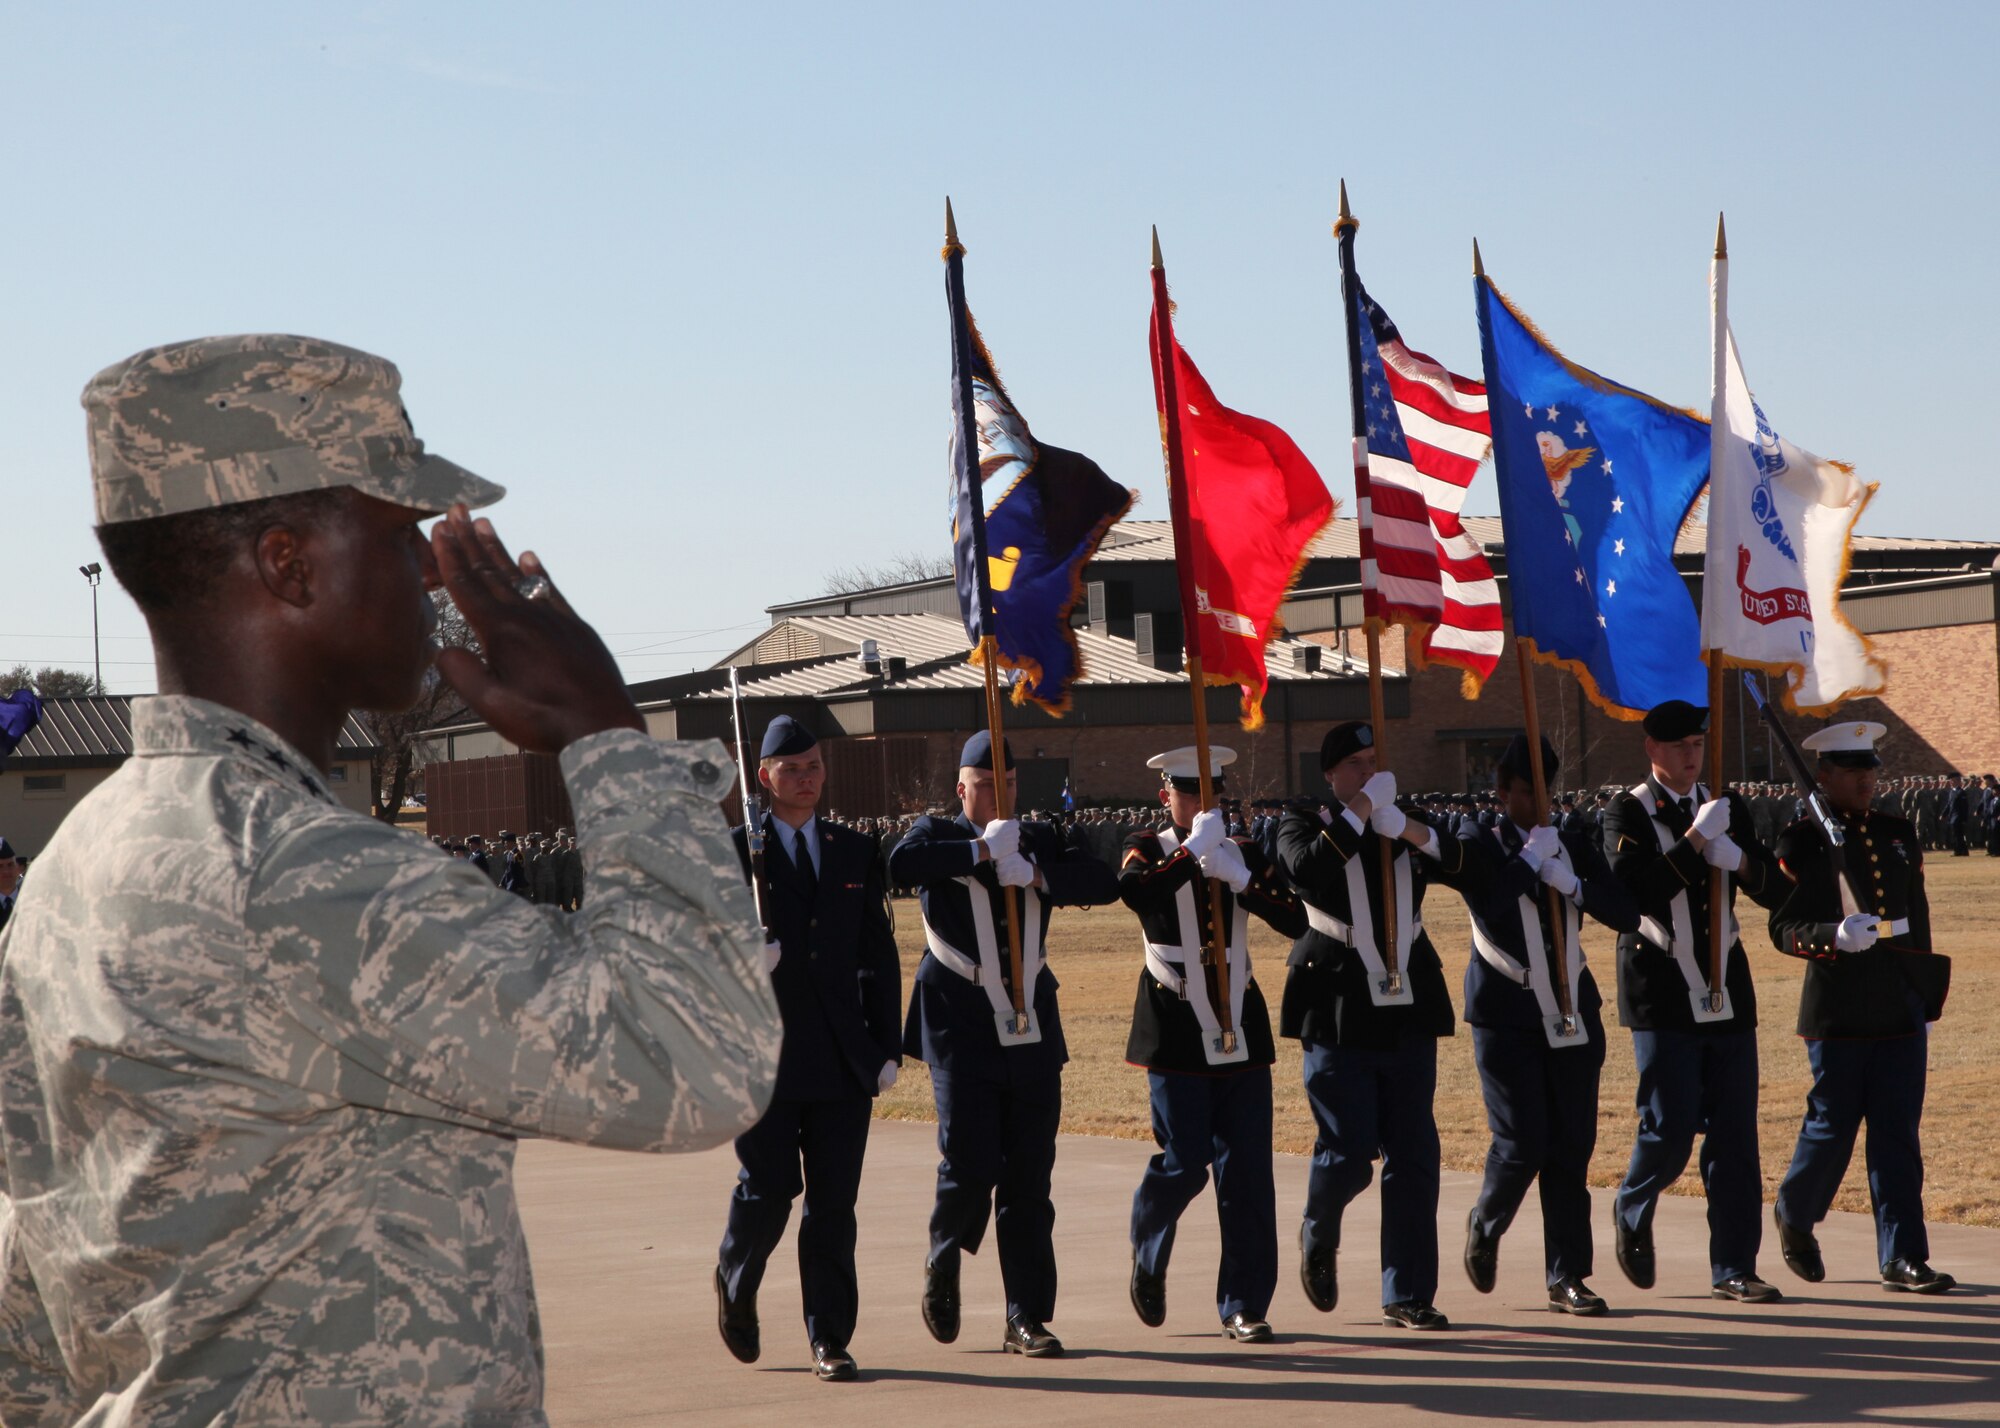 Gen. Edward Rice Jr., Air Education and Training Command commander, renders a salute March 2 during a pass and review parade at Sheppard Air Force Base, Texas. The general hosted the spring AETC leadership conference at the North Texas base to discuss various topics that related to the command. (U.S. Air Force photo/Airman 1st Class Adawn Kelsey)